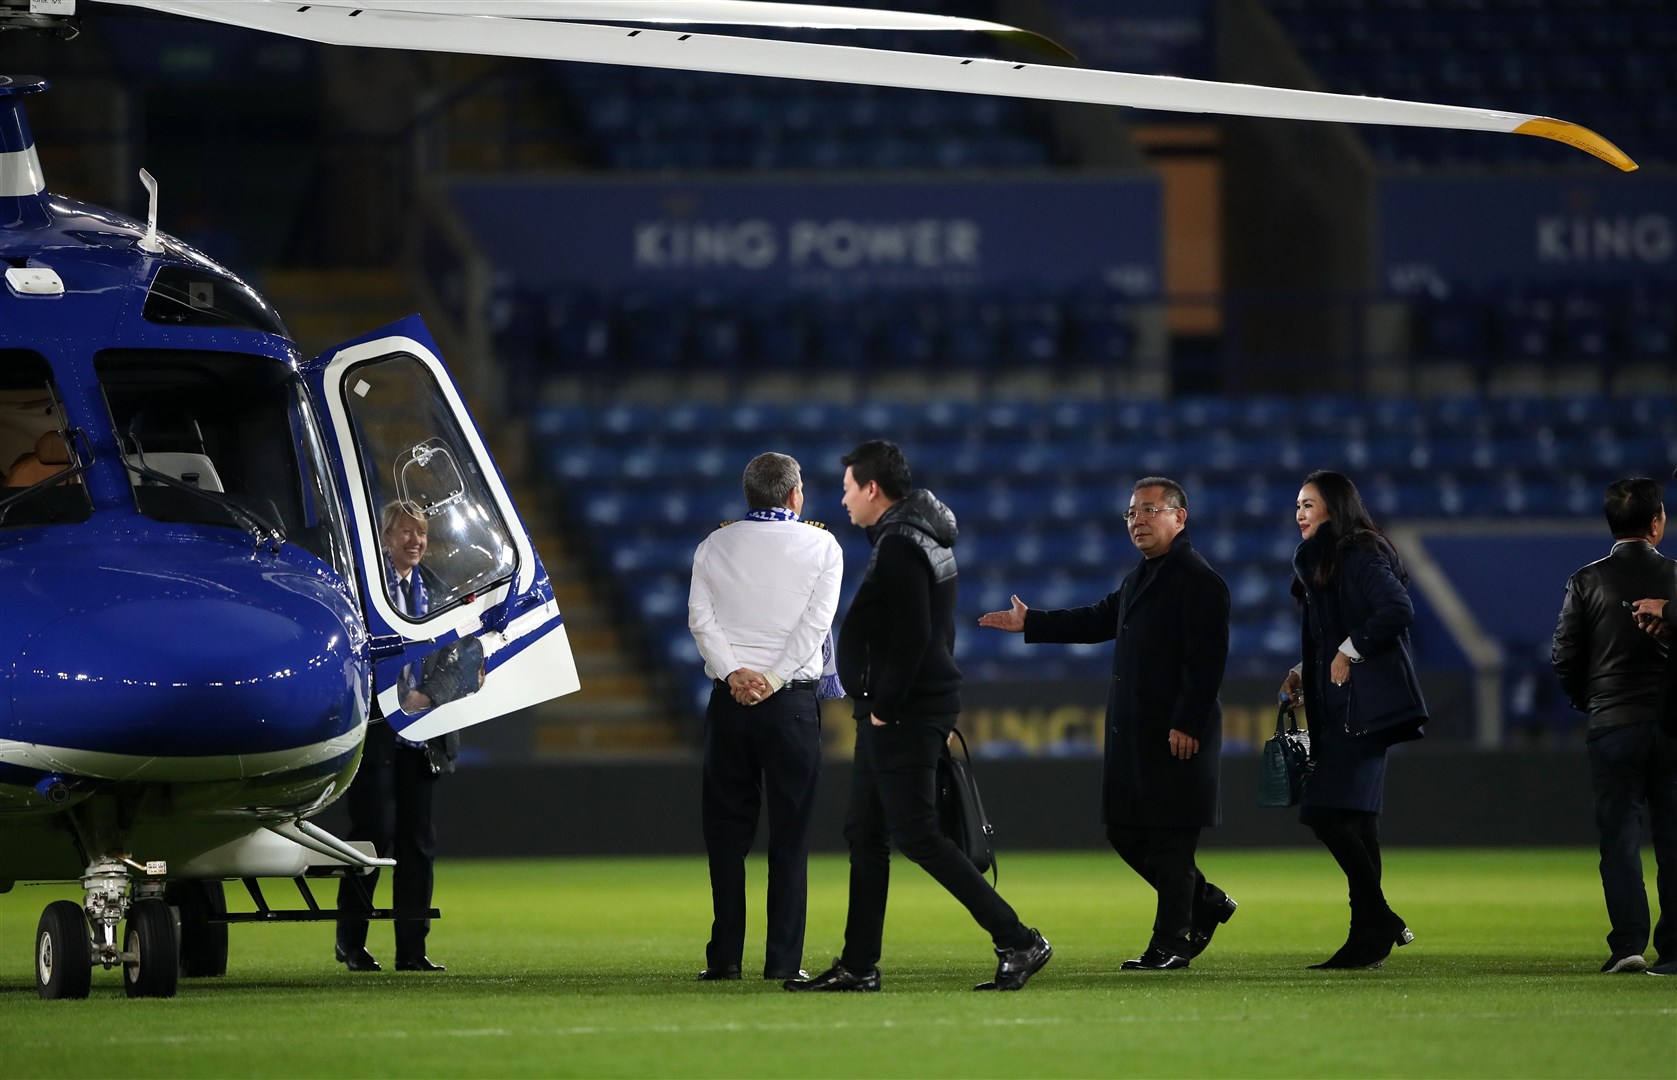 Vichai Srivaddhanaprabha was known for leaving Leicester games by helicopter (Nick Potts/PA)